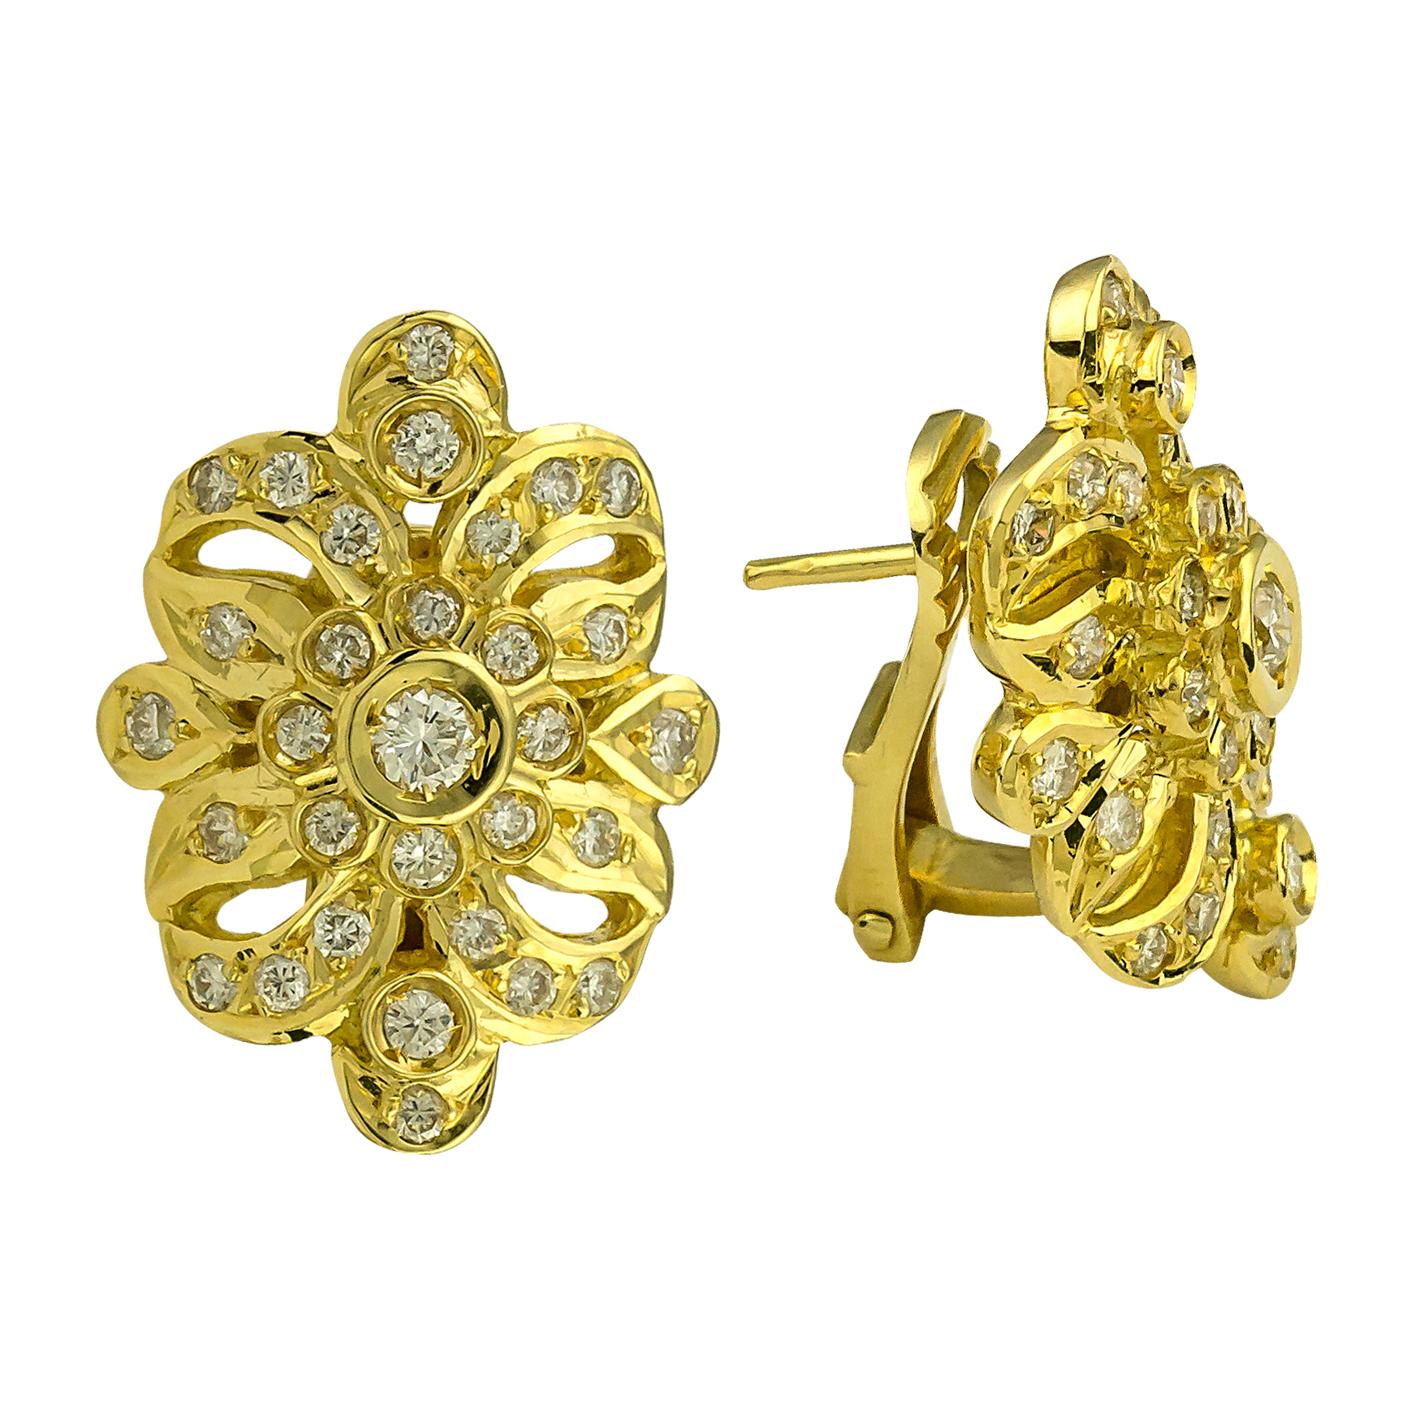 S.Georgios Earrings are Hand Made from 18 Karat Yellow Gold and are decorated with Byzantine-era style workmanship and feature Brilliant cut Diamonds total weight of 1,14 Carats. This unique pair of earrings can be also adjusted to be only a clip.